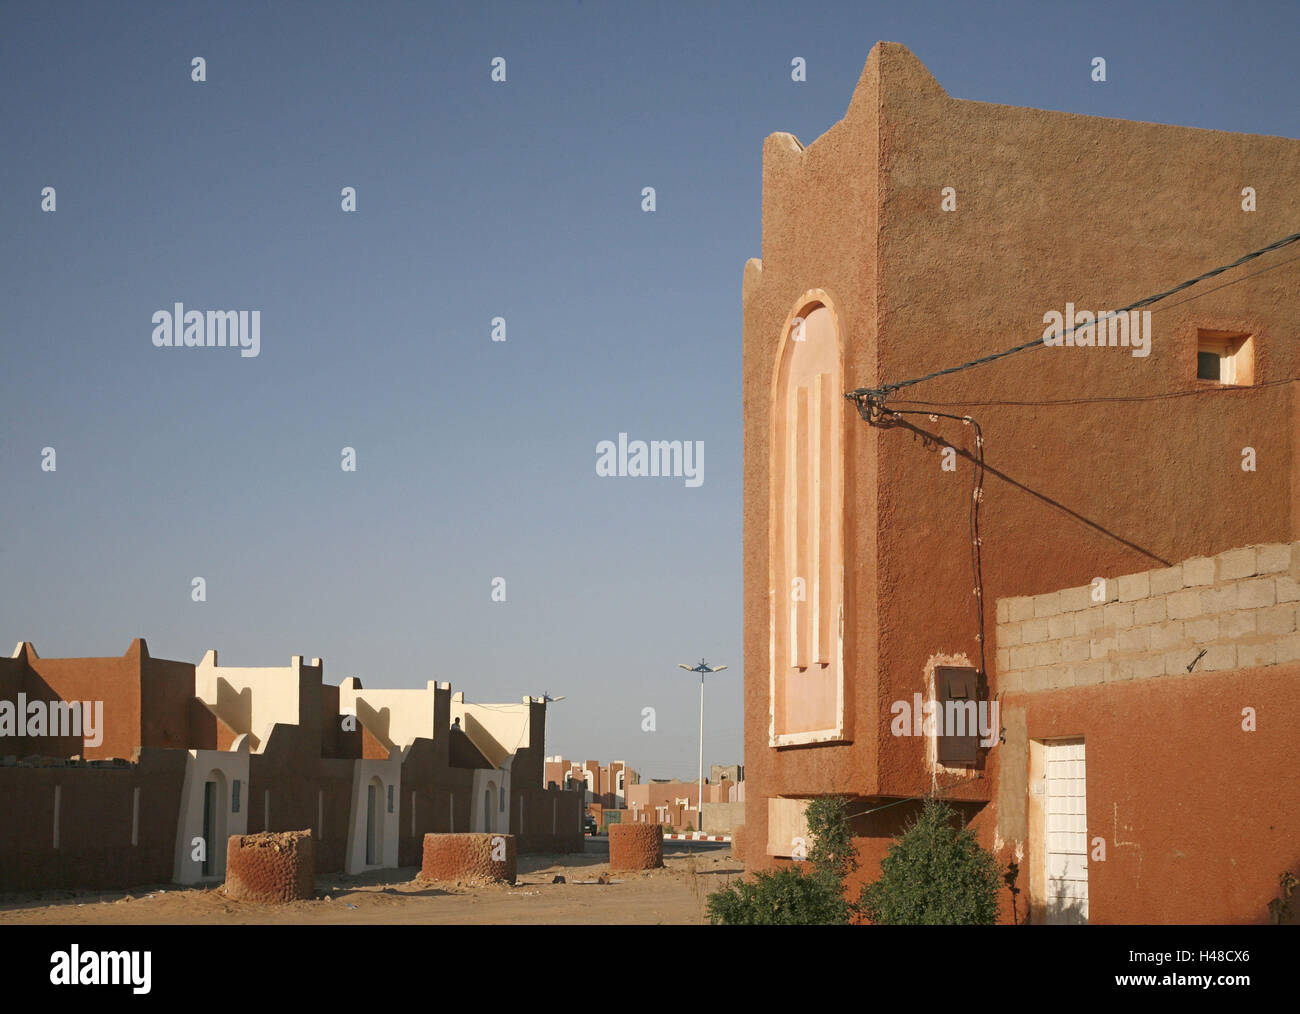 Algeria, Adrar, residential district, houses, detail, Africa, North, Africa, Sahara, oasis, town, red town, building, residential houses, architecture, heaven, cloudless, exit, deserted, Stock Photo